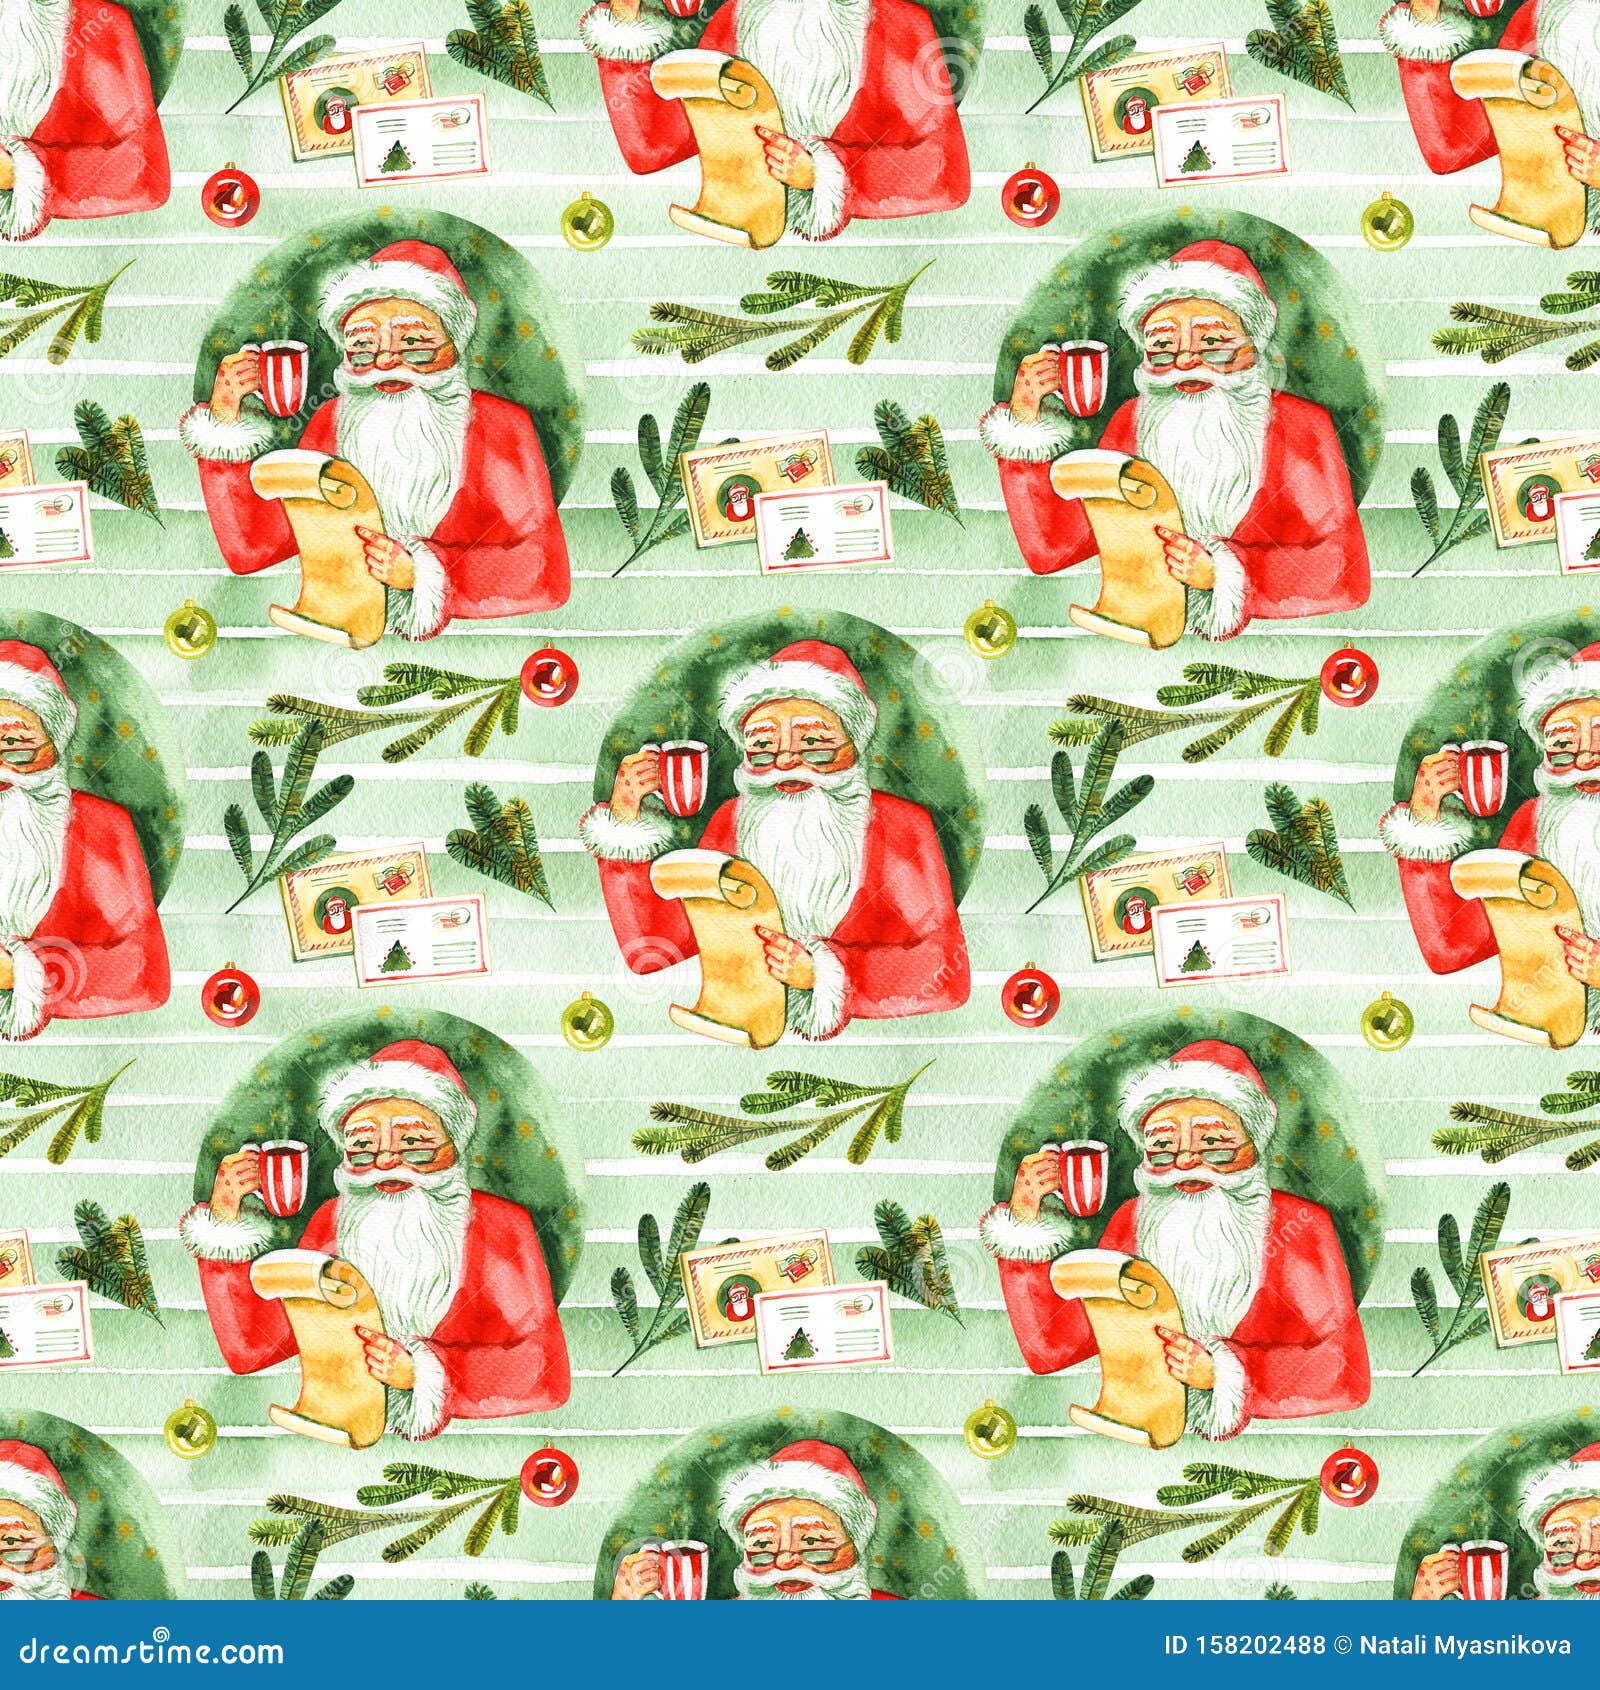 Merry Christmas And Happy New Year Seamless Pattern With Santa And Gifts On White Background ...